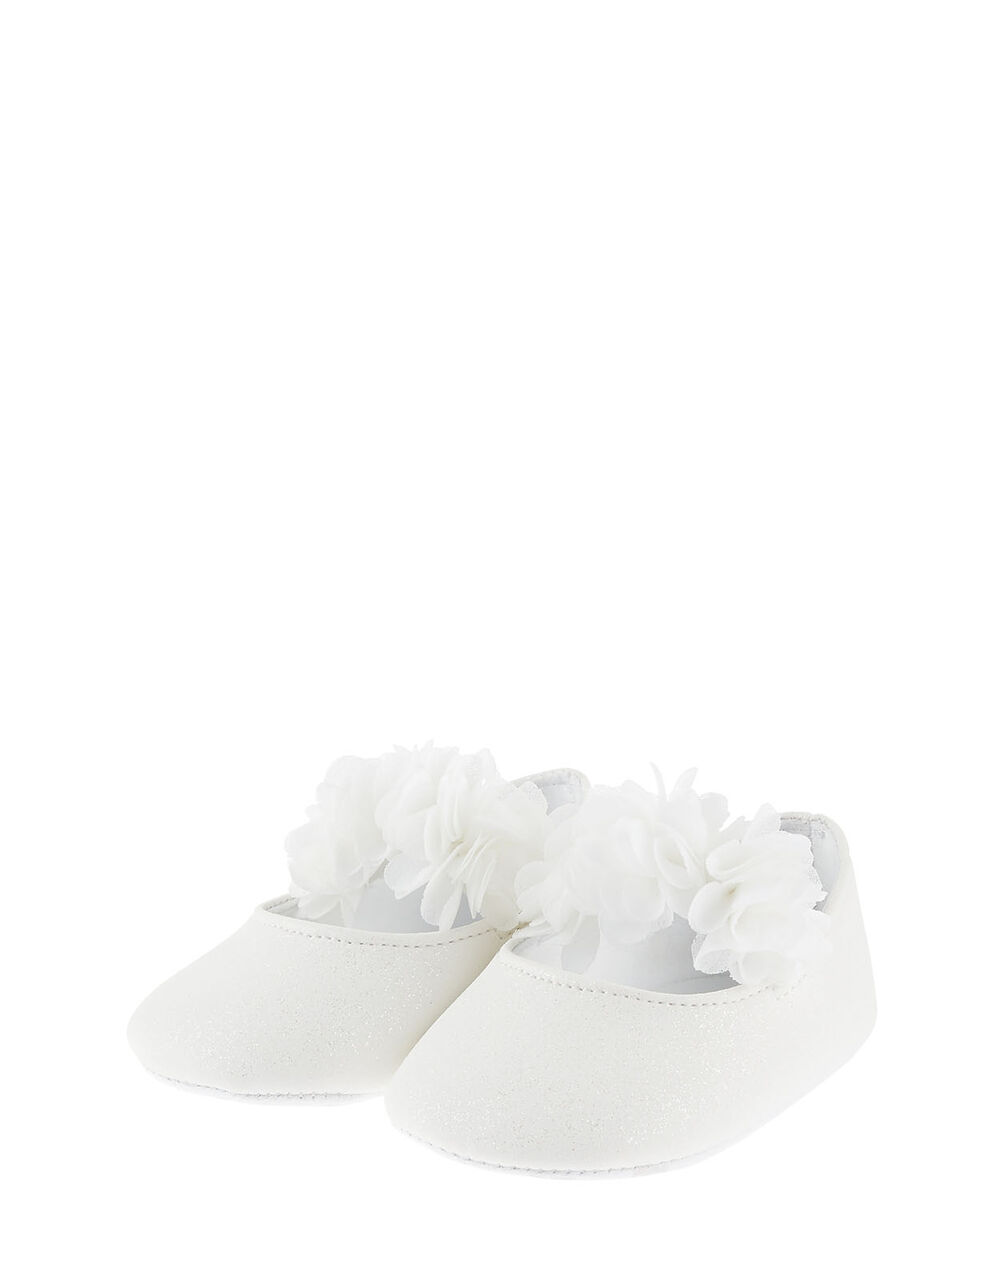 Children Children's Shoes & Sandals | Shimmer Corsage Booties Ivory - HB70579